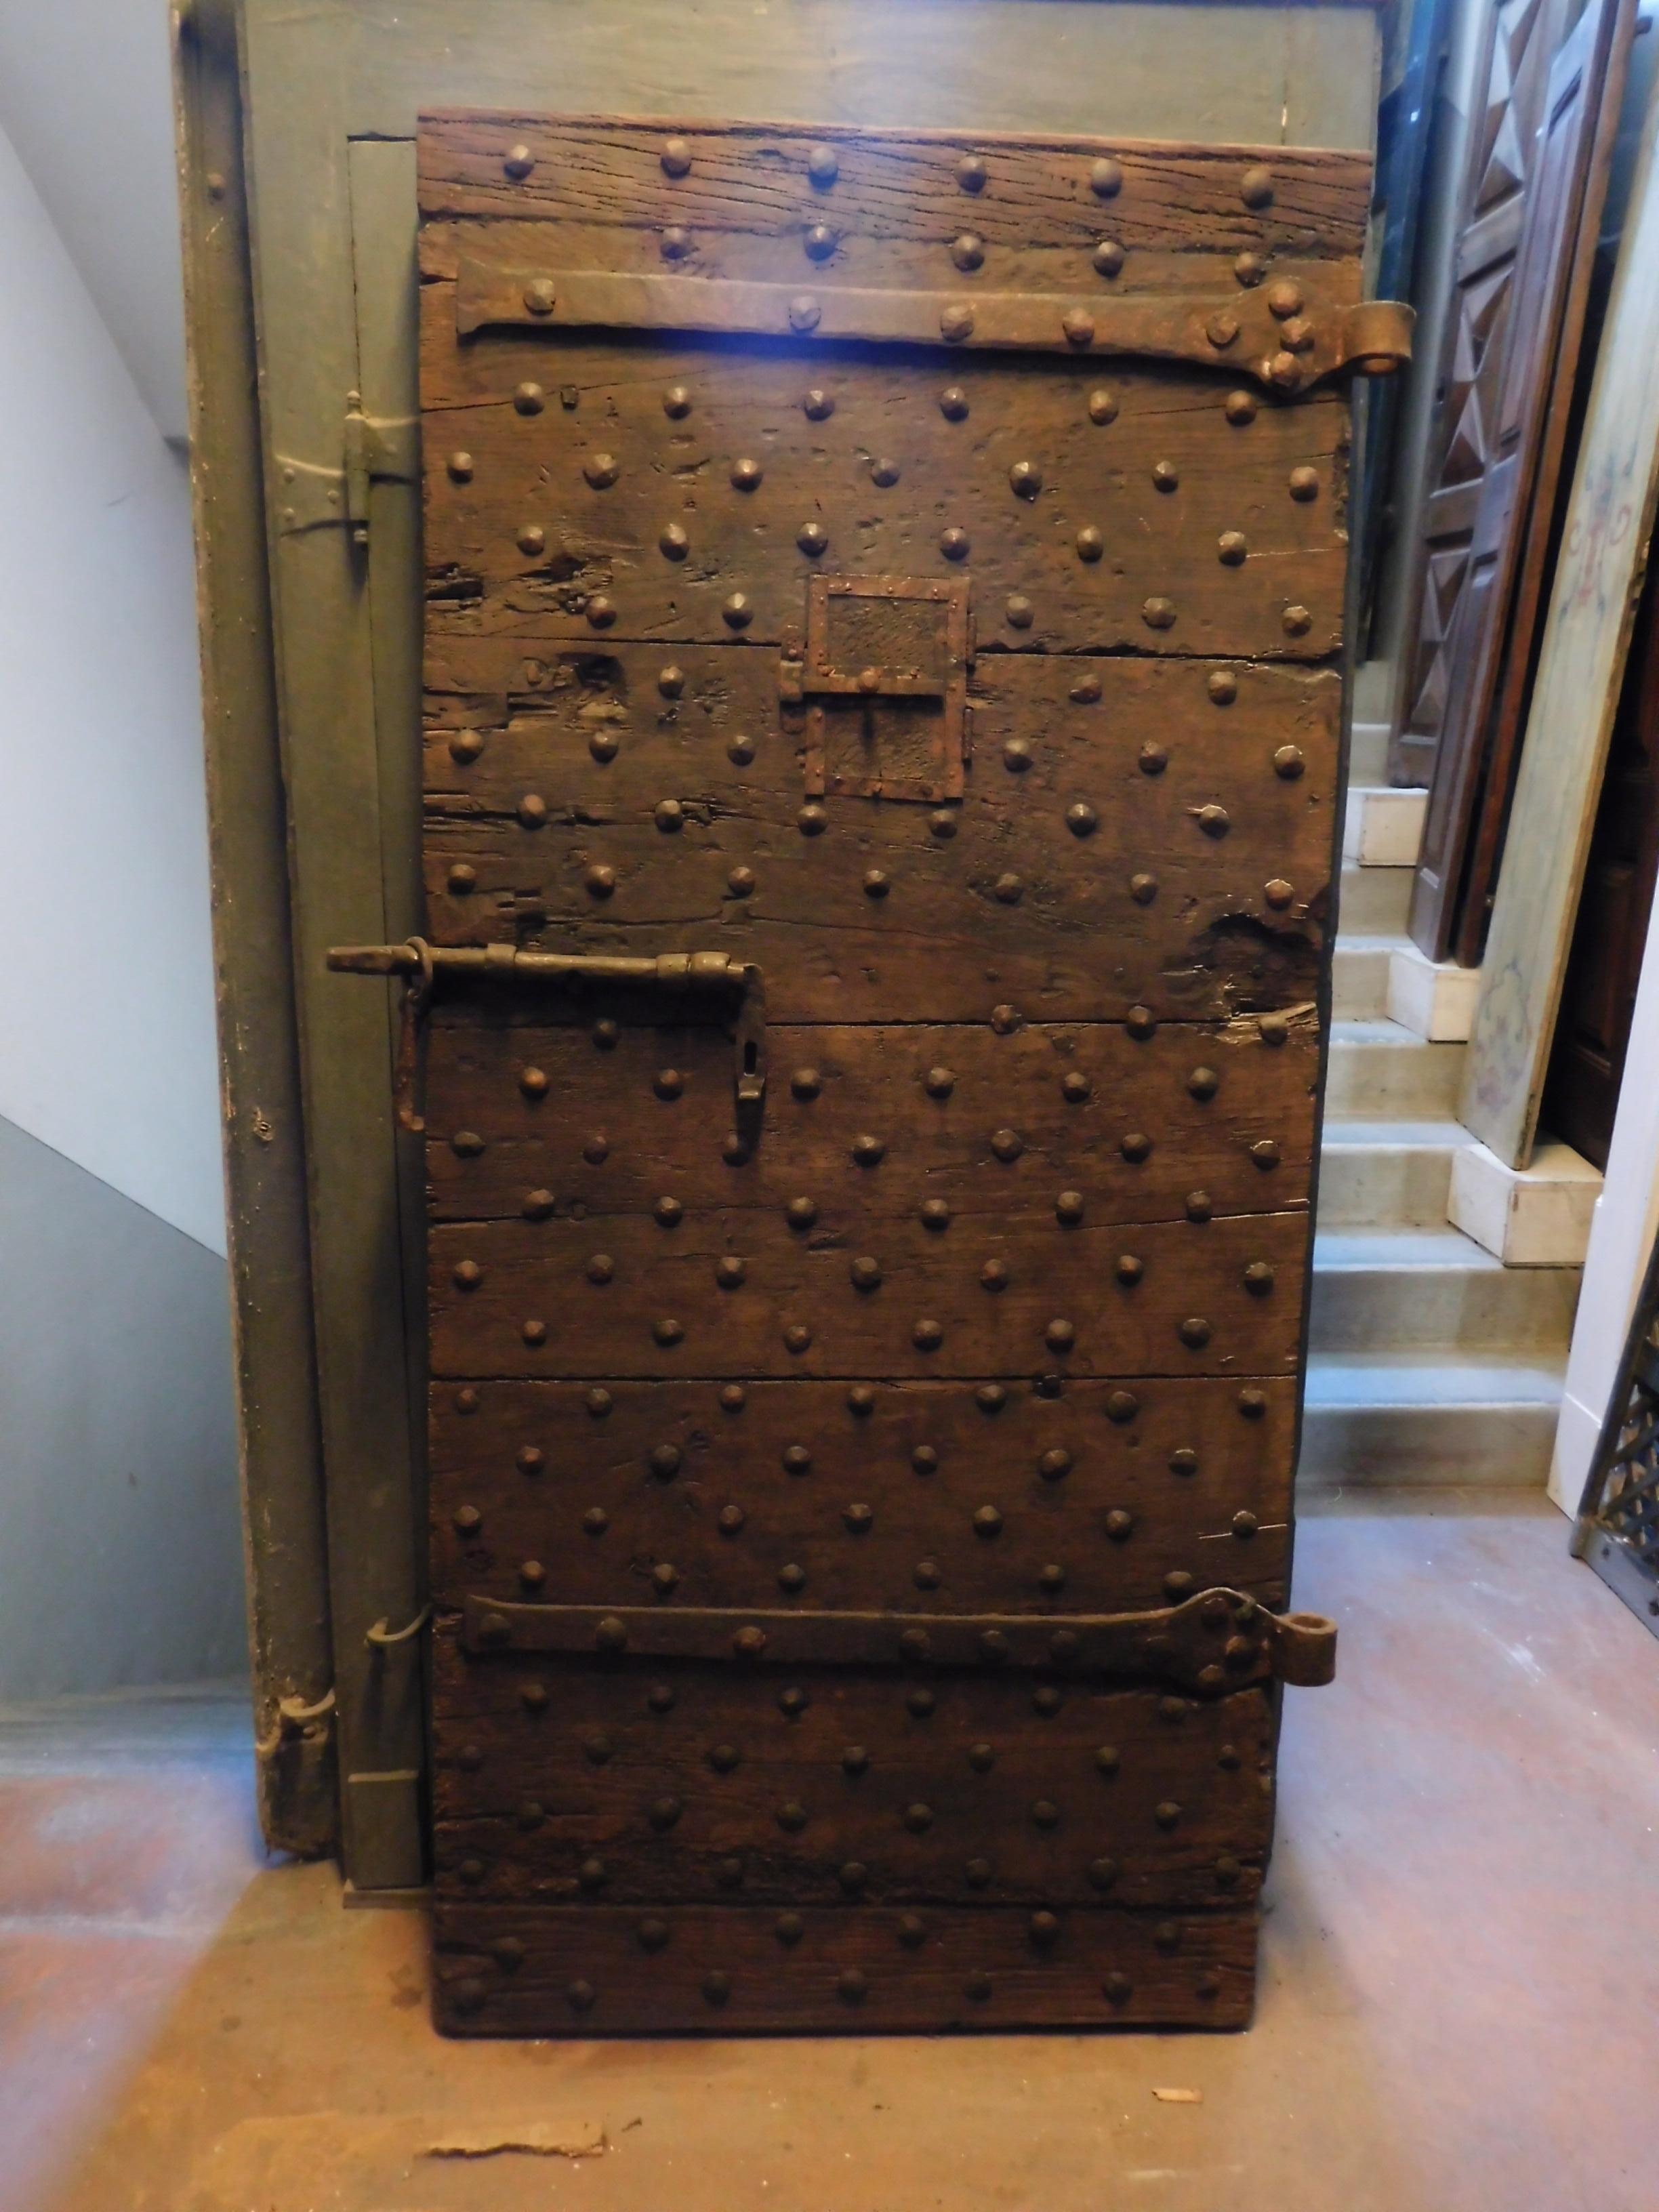 Ancient prison door with small peephole, it has kept the original irons and the locks clearly visible and massive, it comes from a castle of the 18th century, in Italy.
Beautiful and impressive, perfect for a wine cellar or a garage with an ancient